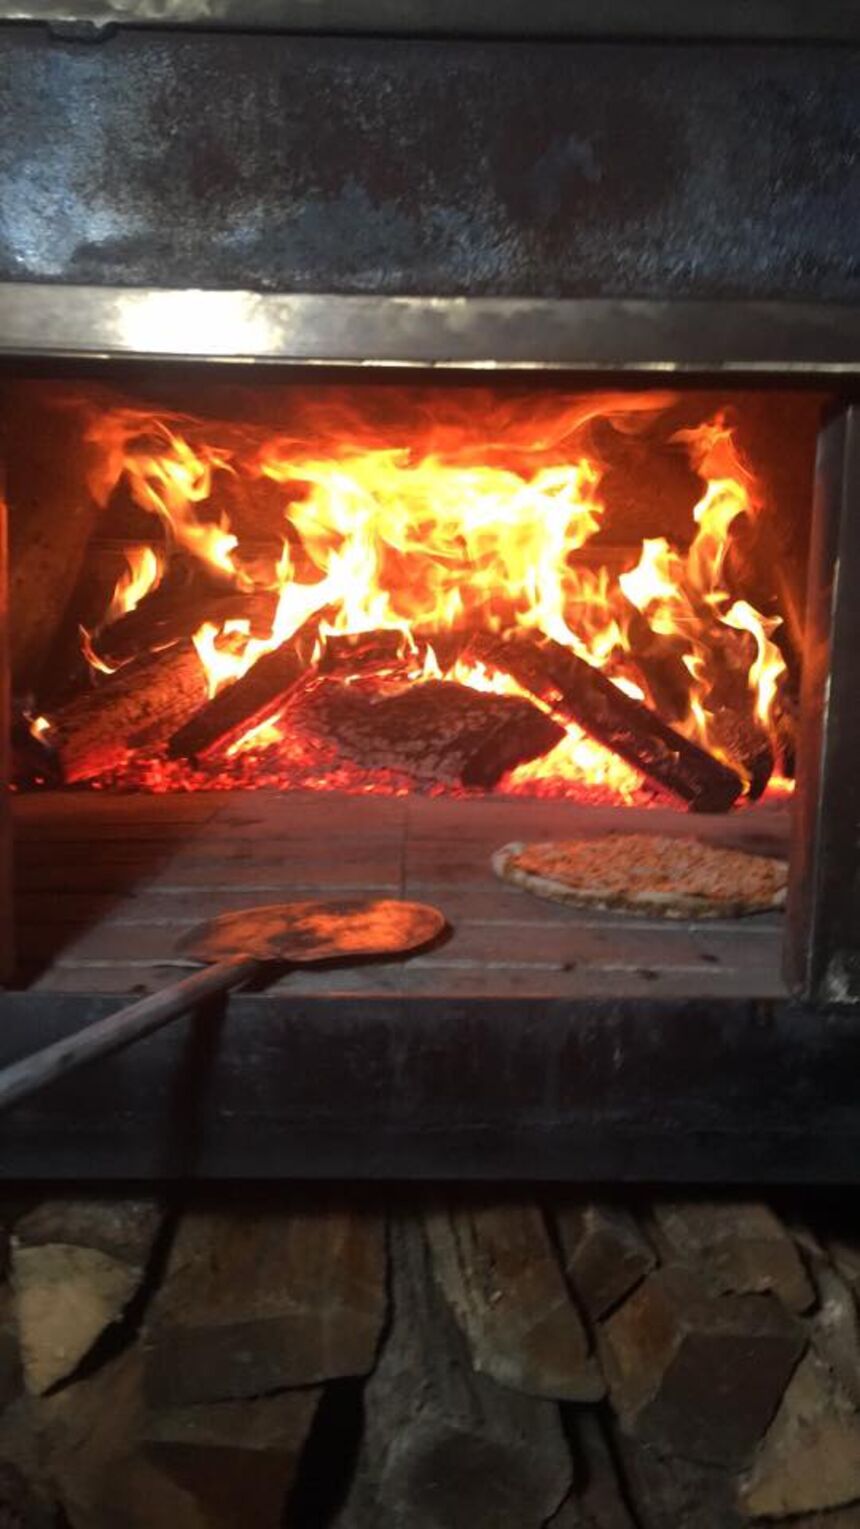 Russo's Wood Fired Pizza